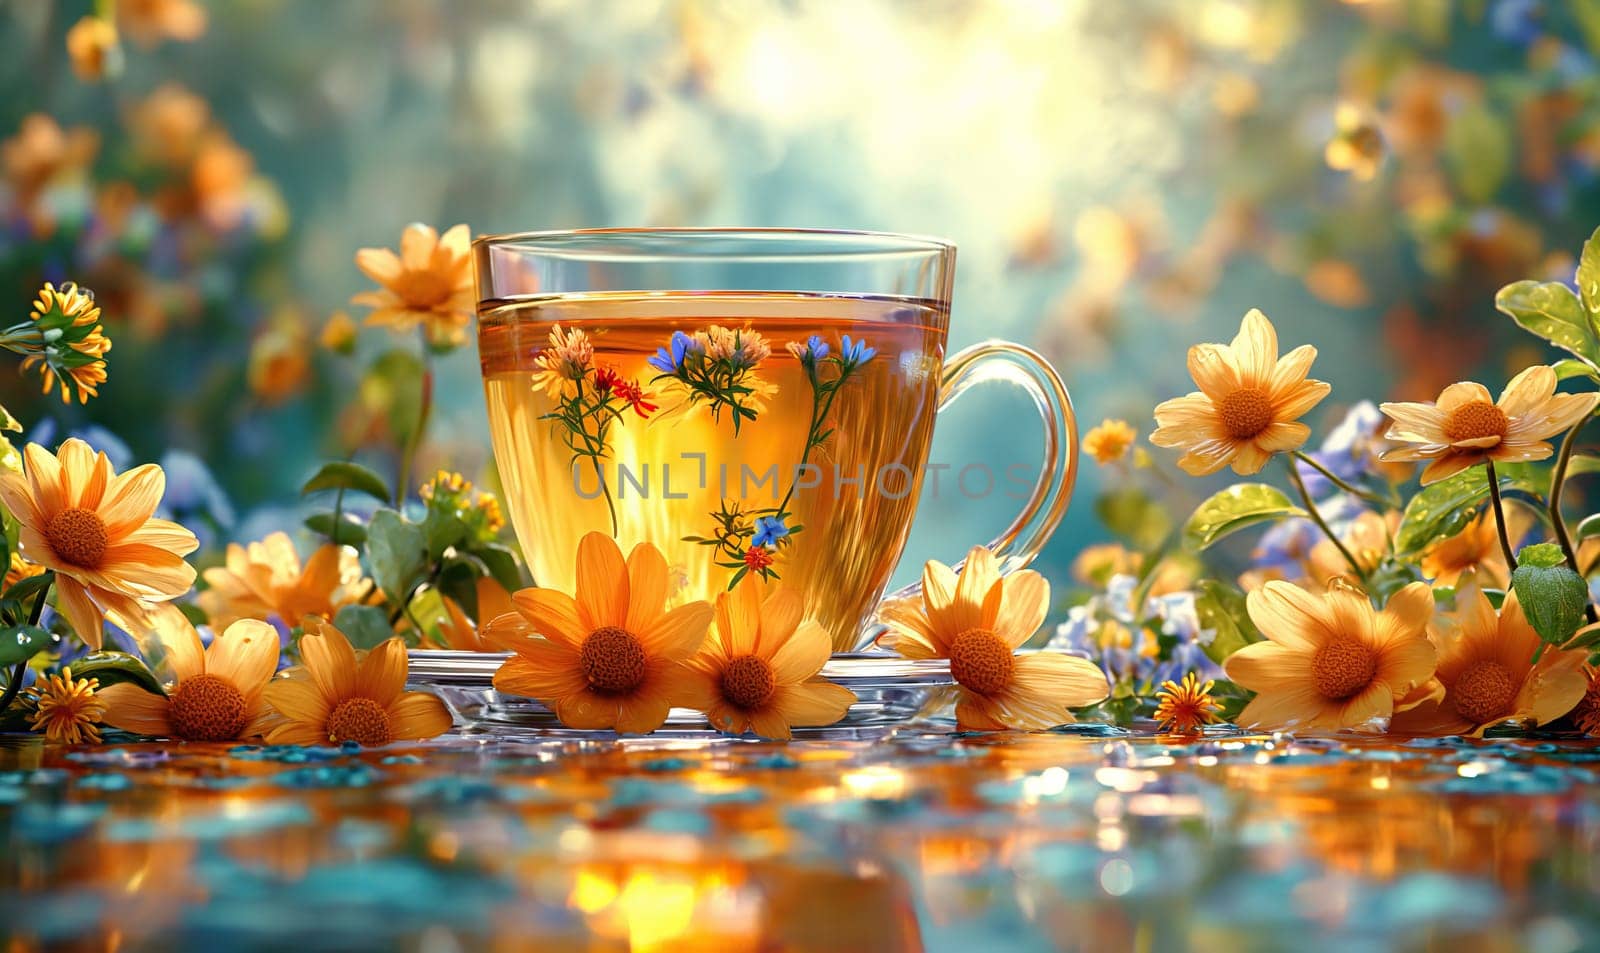 Floral tea in a transparent mug on a background with flowers. by Fischeron